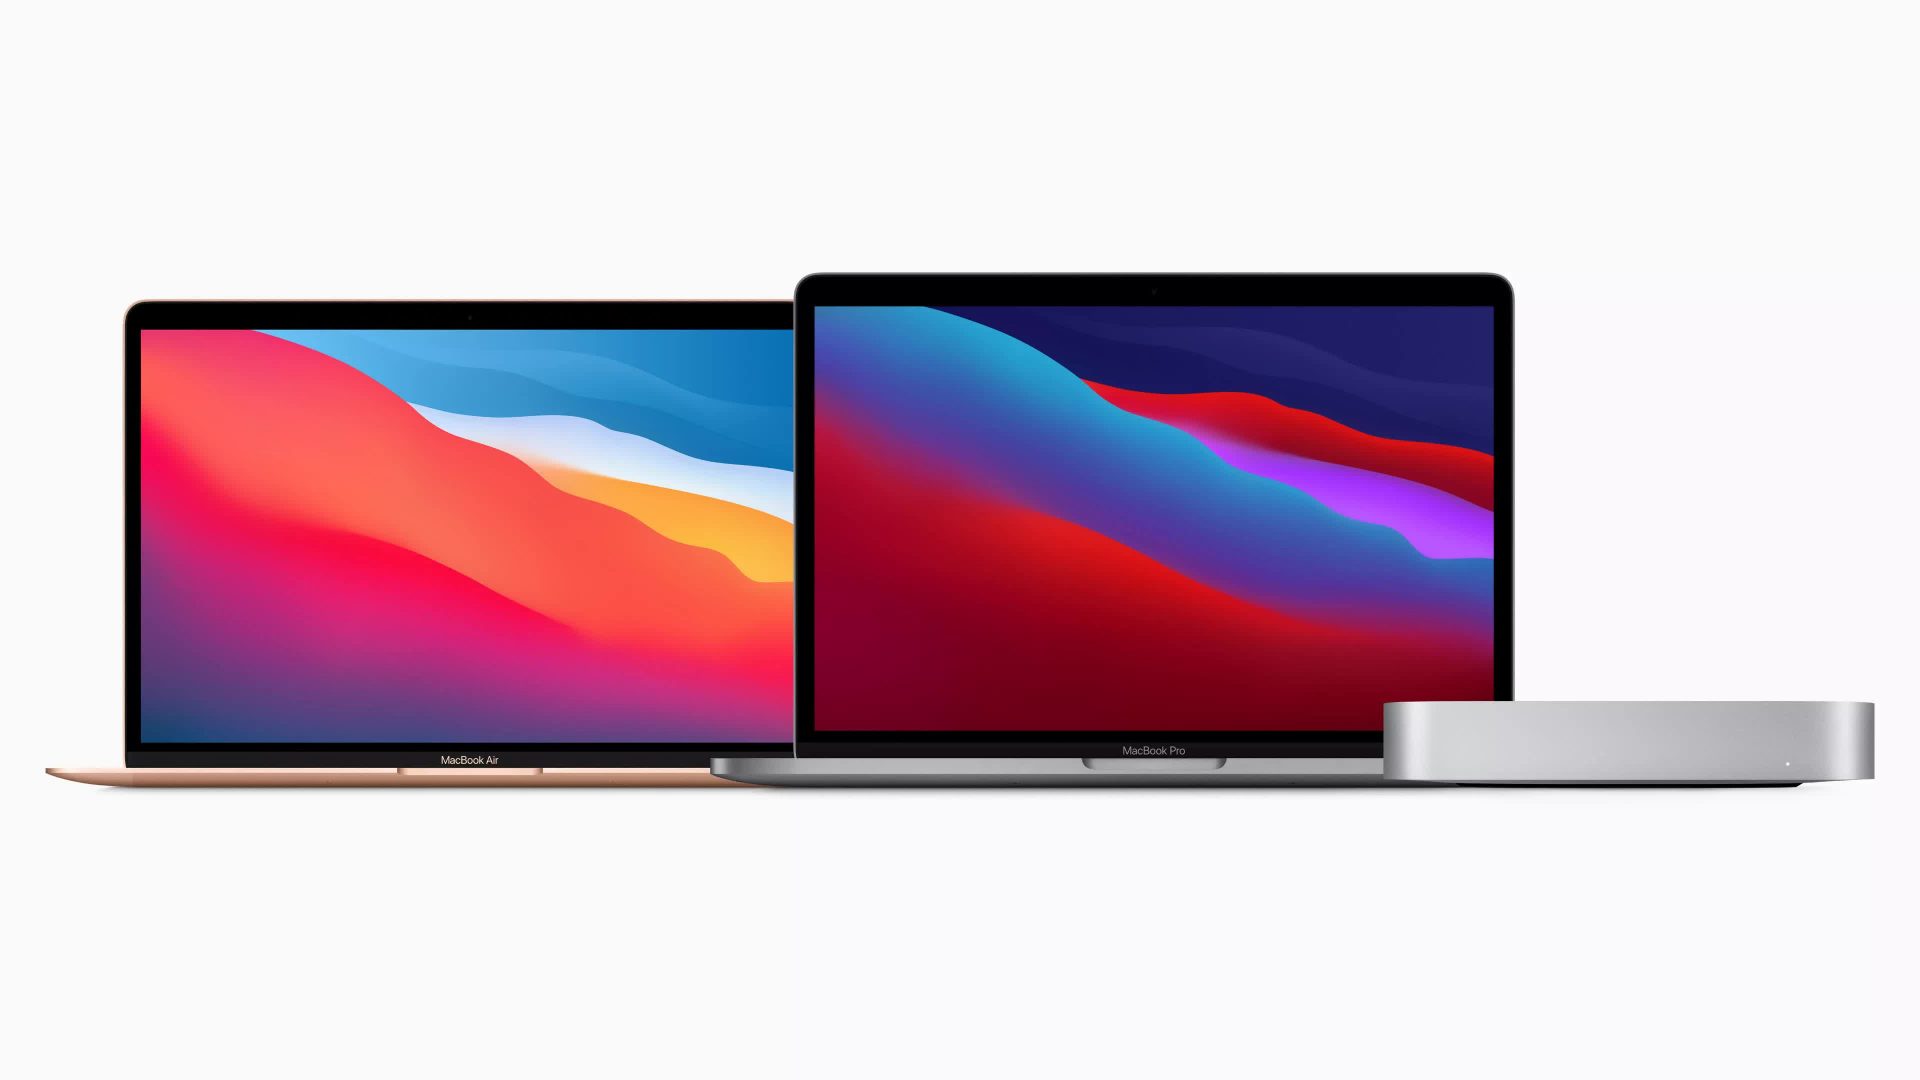 New macOS malware found, but threat remains unknown